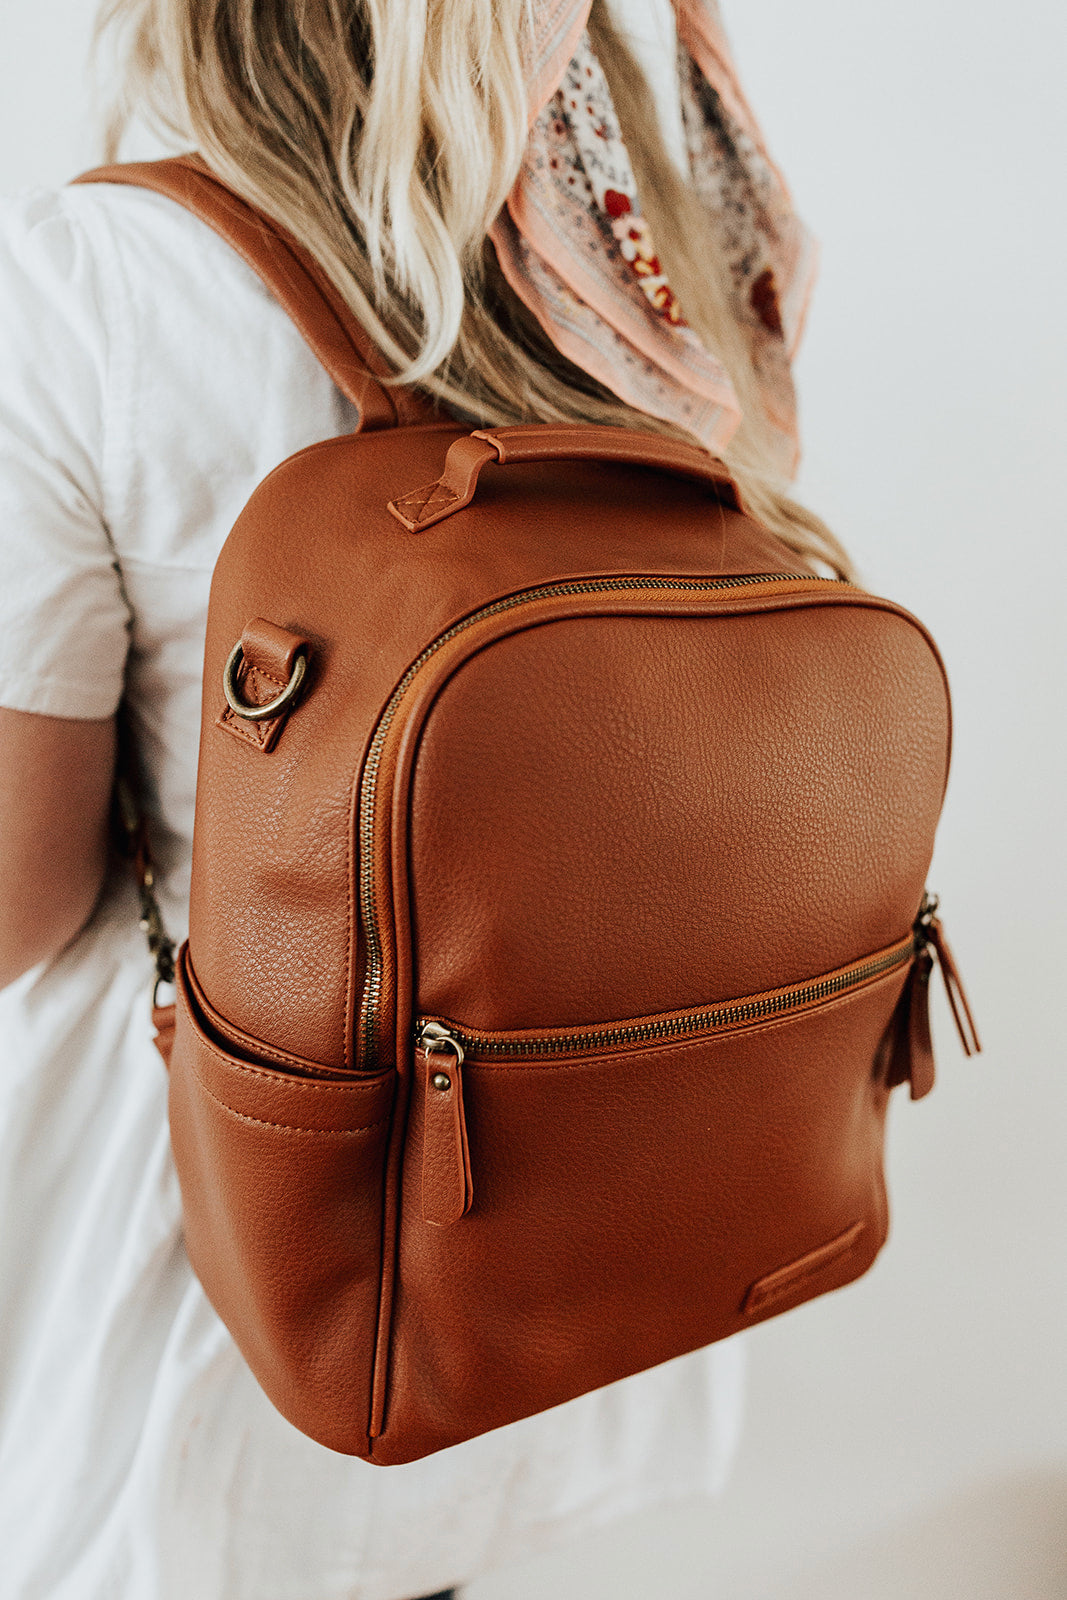 Buy PERKED Eclipse Backpack from made up of Leather for Men and Women in  Camel color at Amazon.in